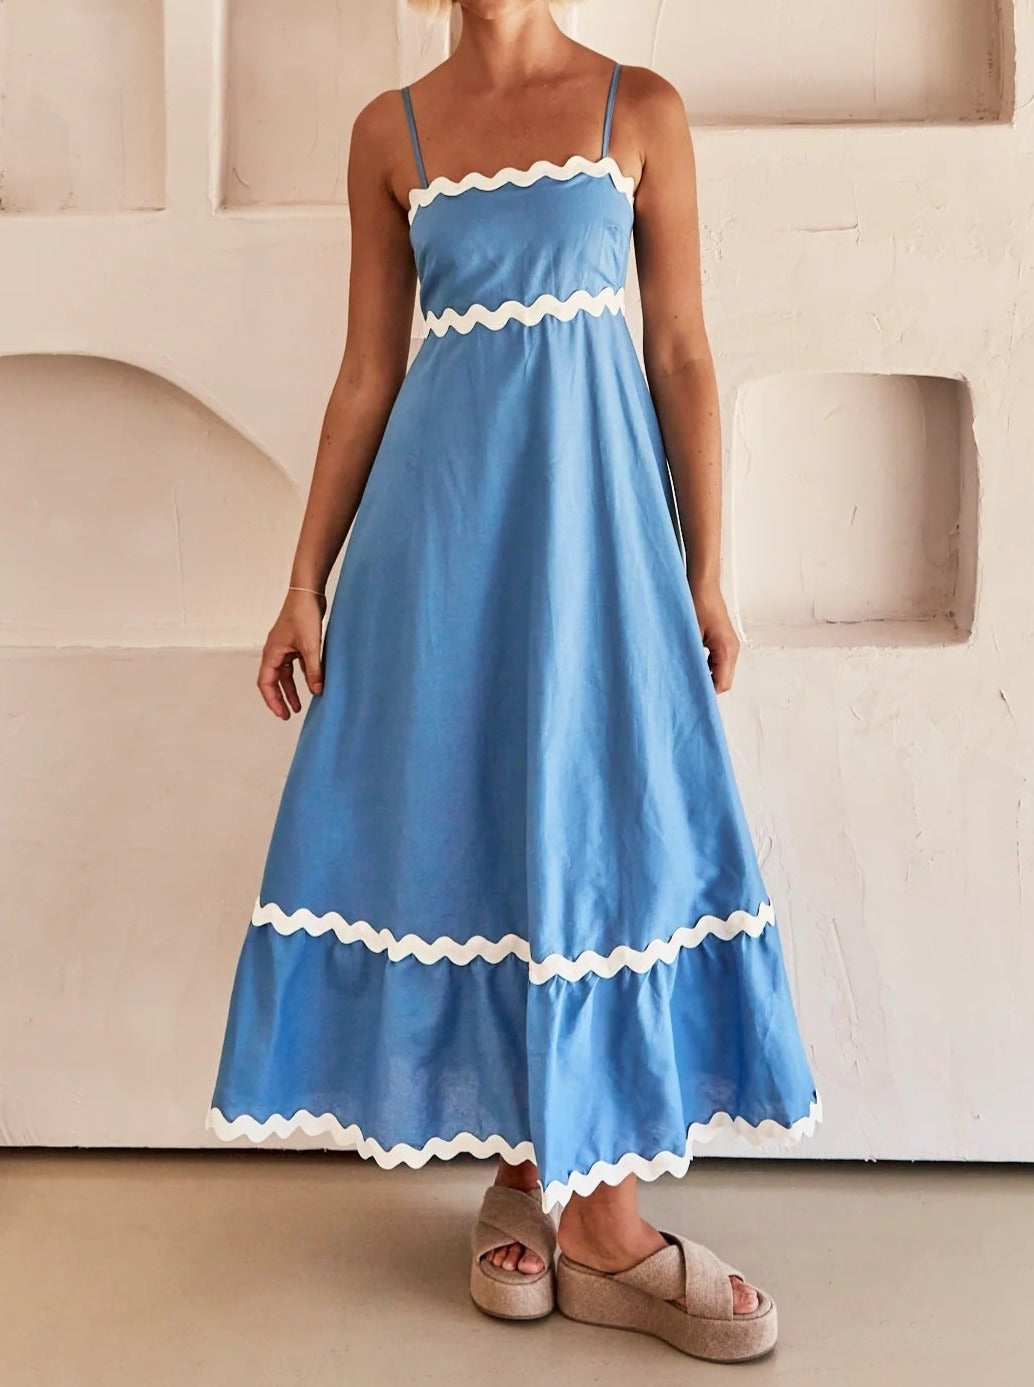 NTG Fad Lake Blue / S Solid color lace splicing suspender strapless full skirt dress